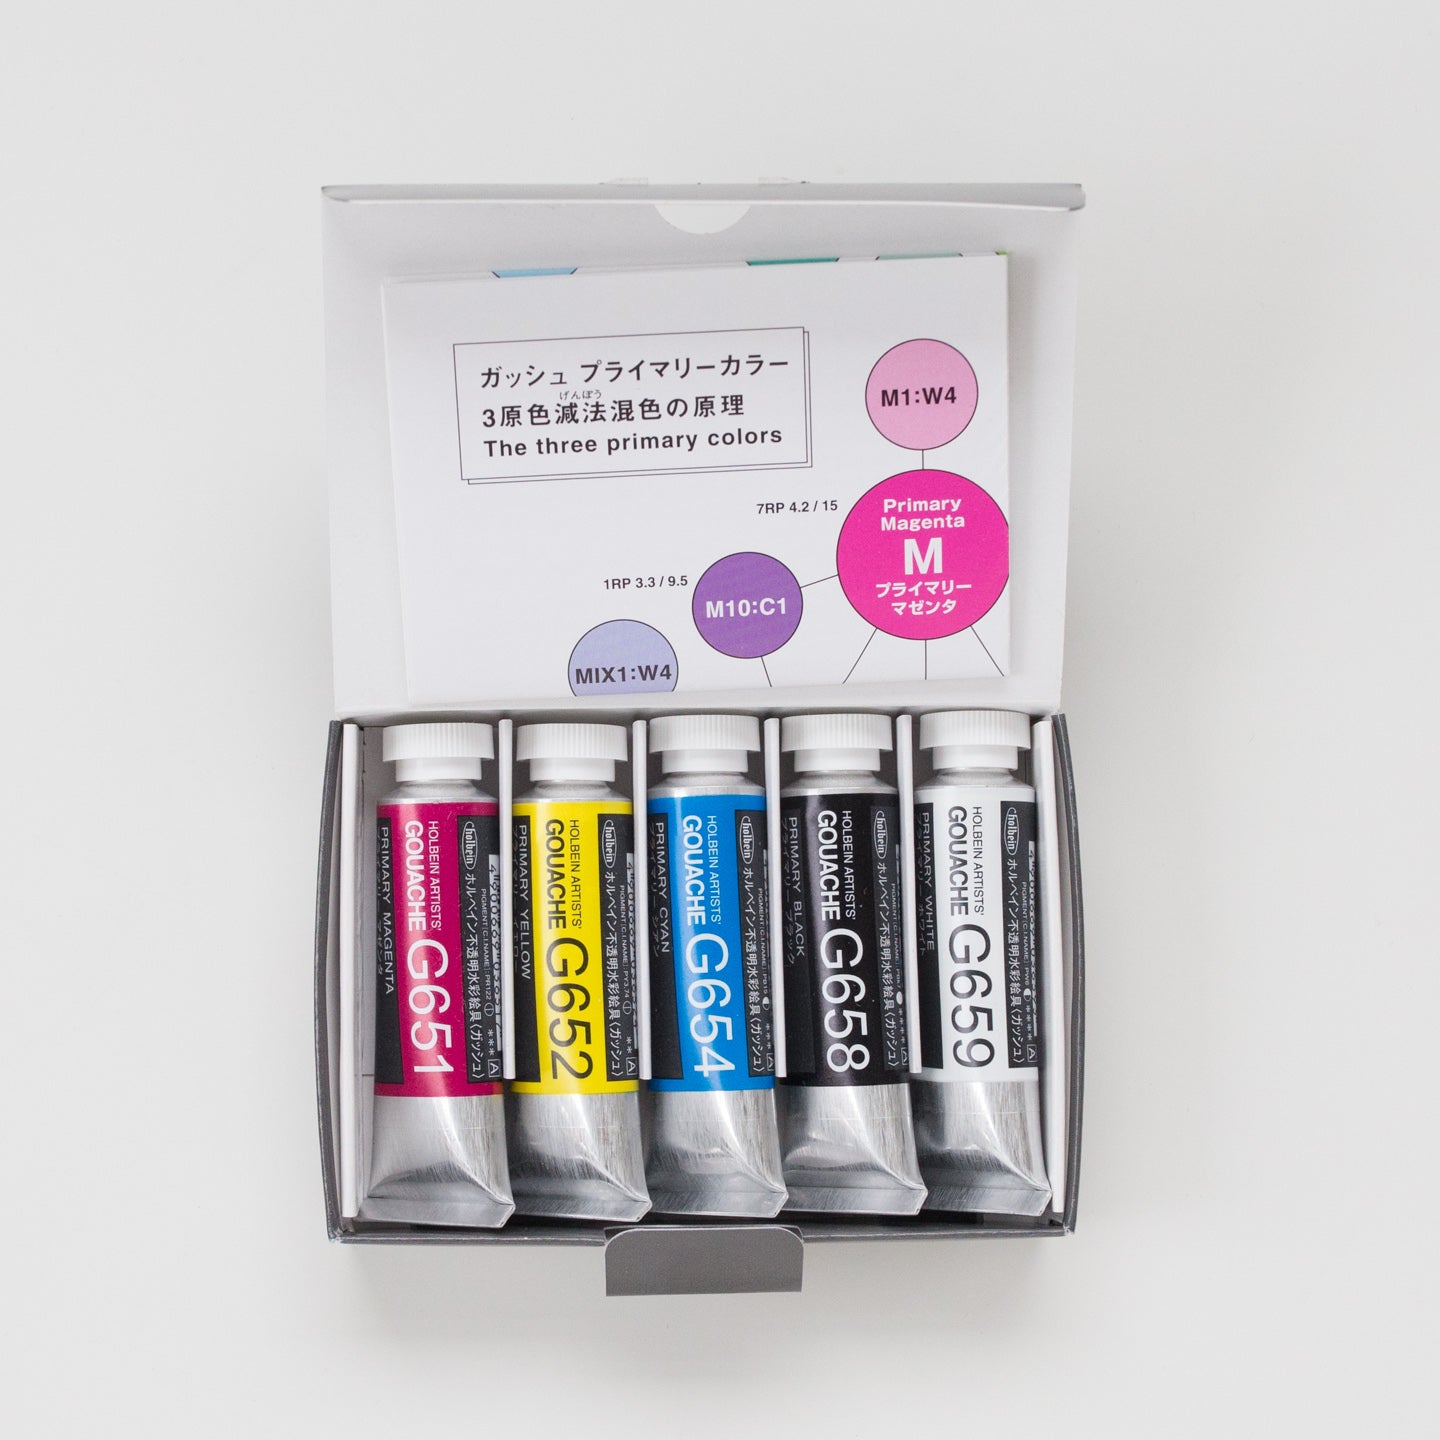 Holbein Designers Gouache 5-color 15ml Mixing Colors Set 